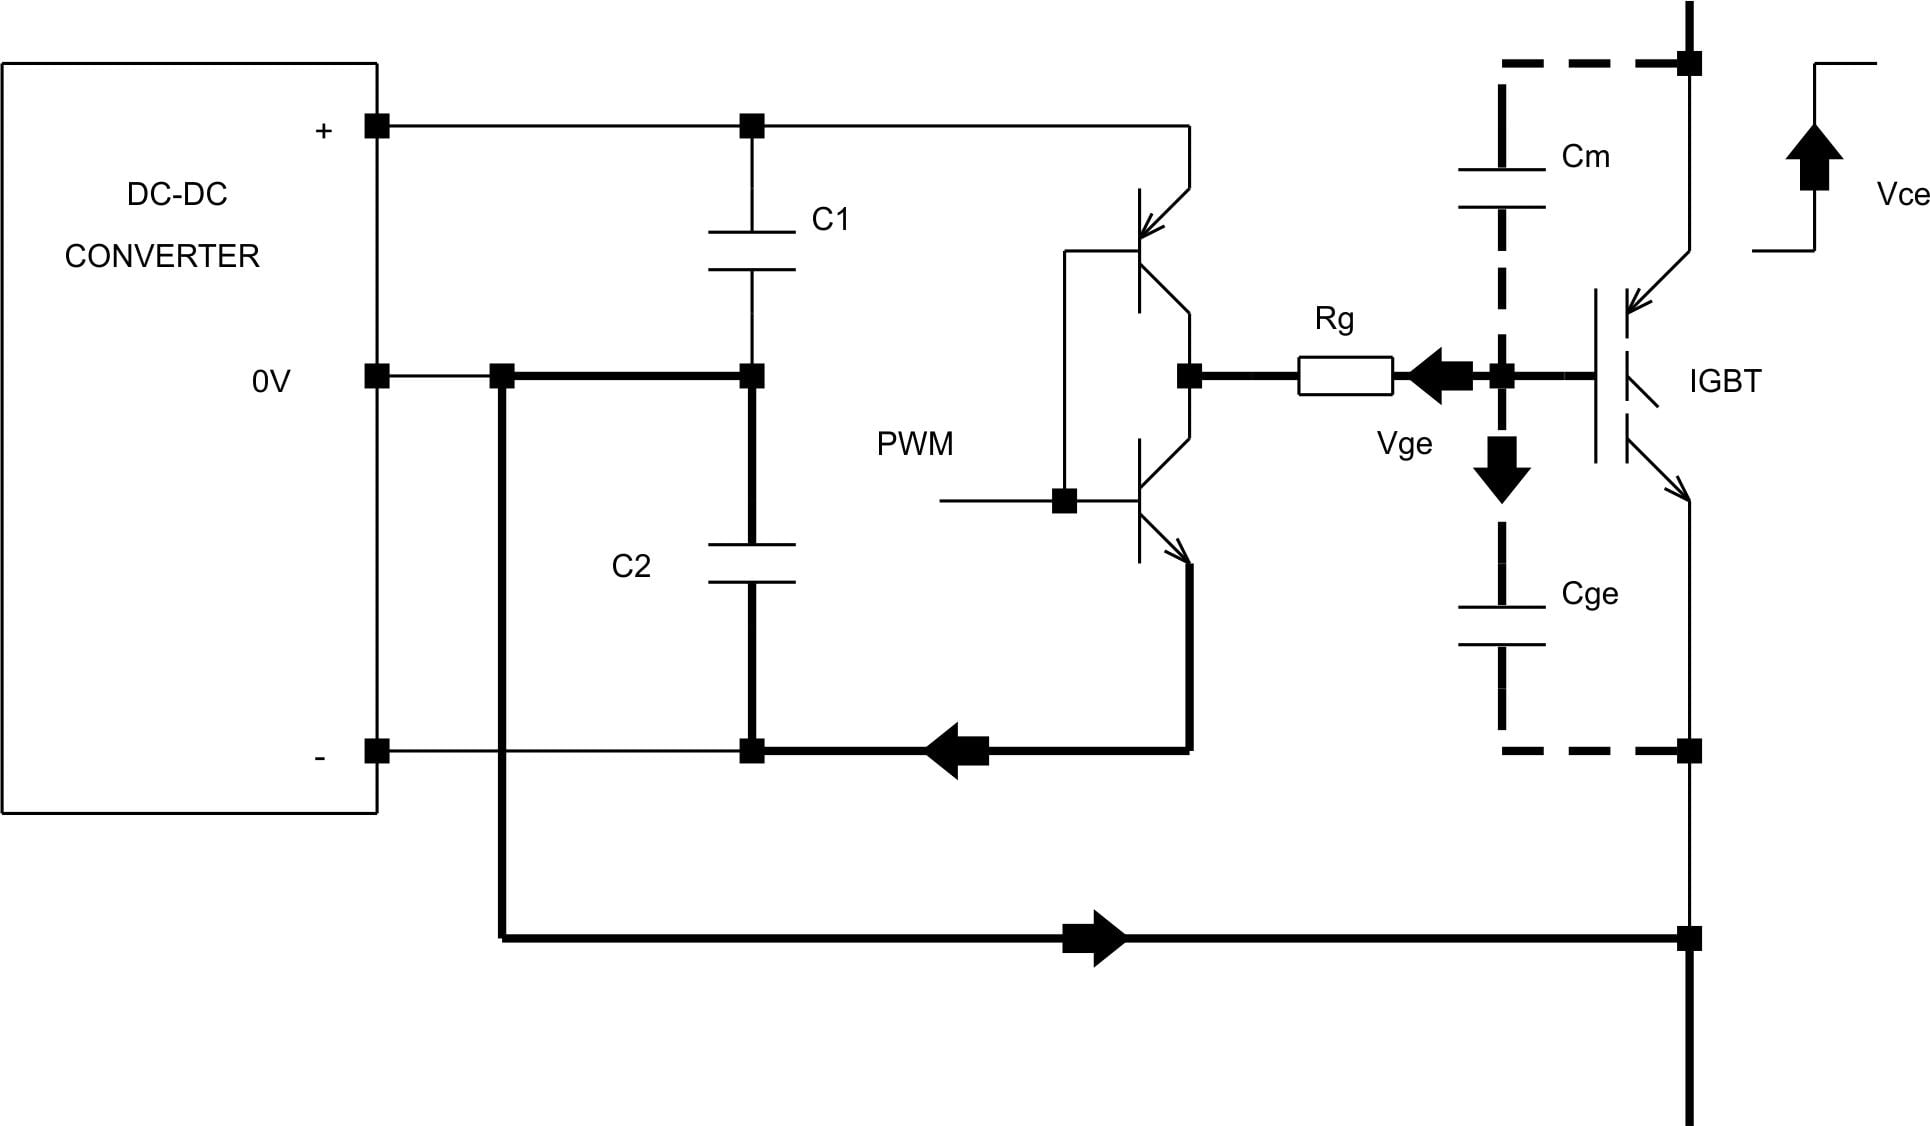 Powering Igbt Gate Drives With Dc